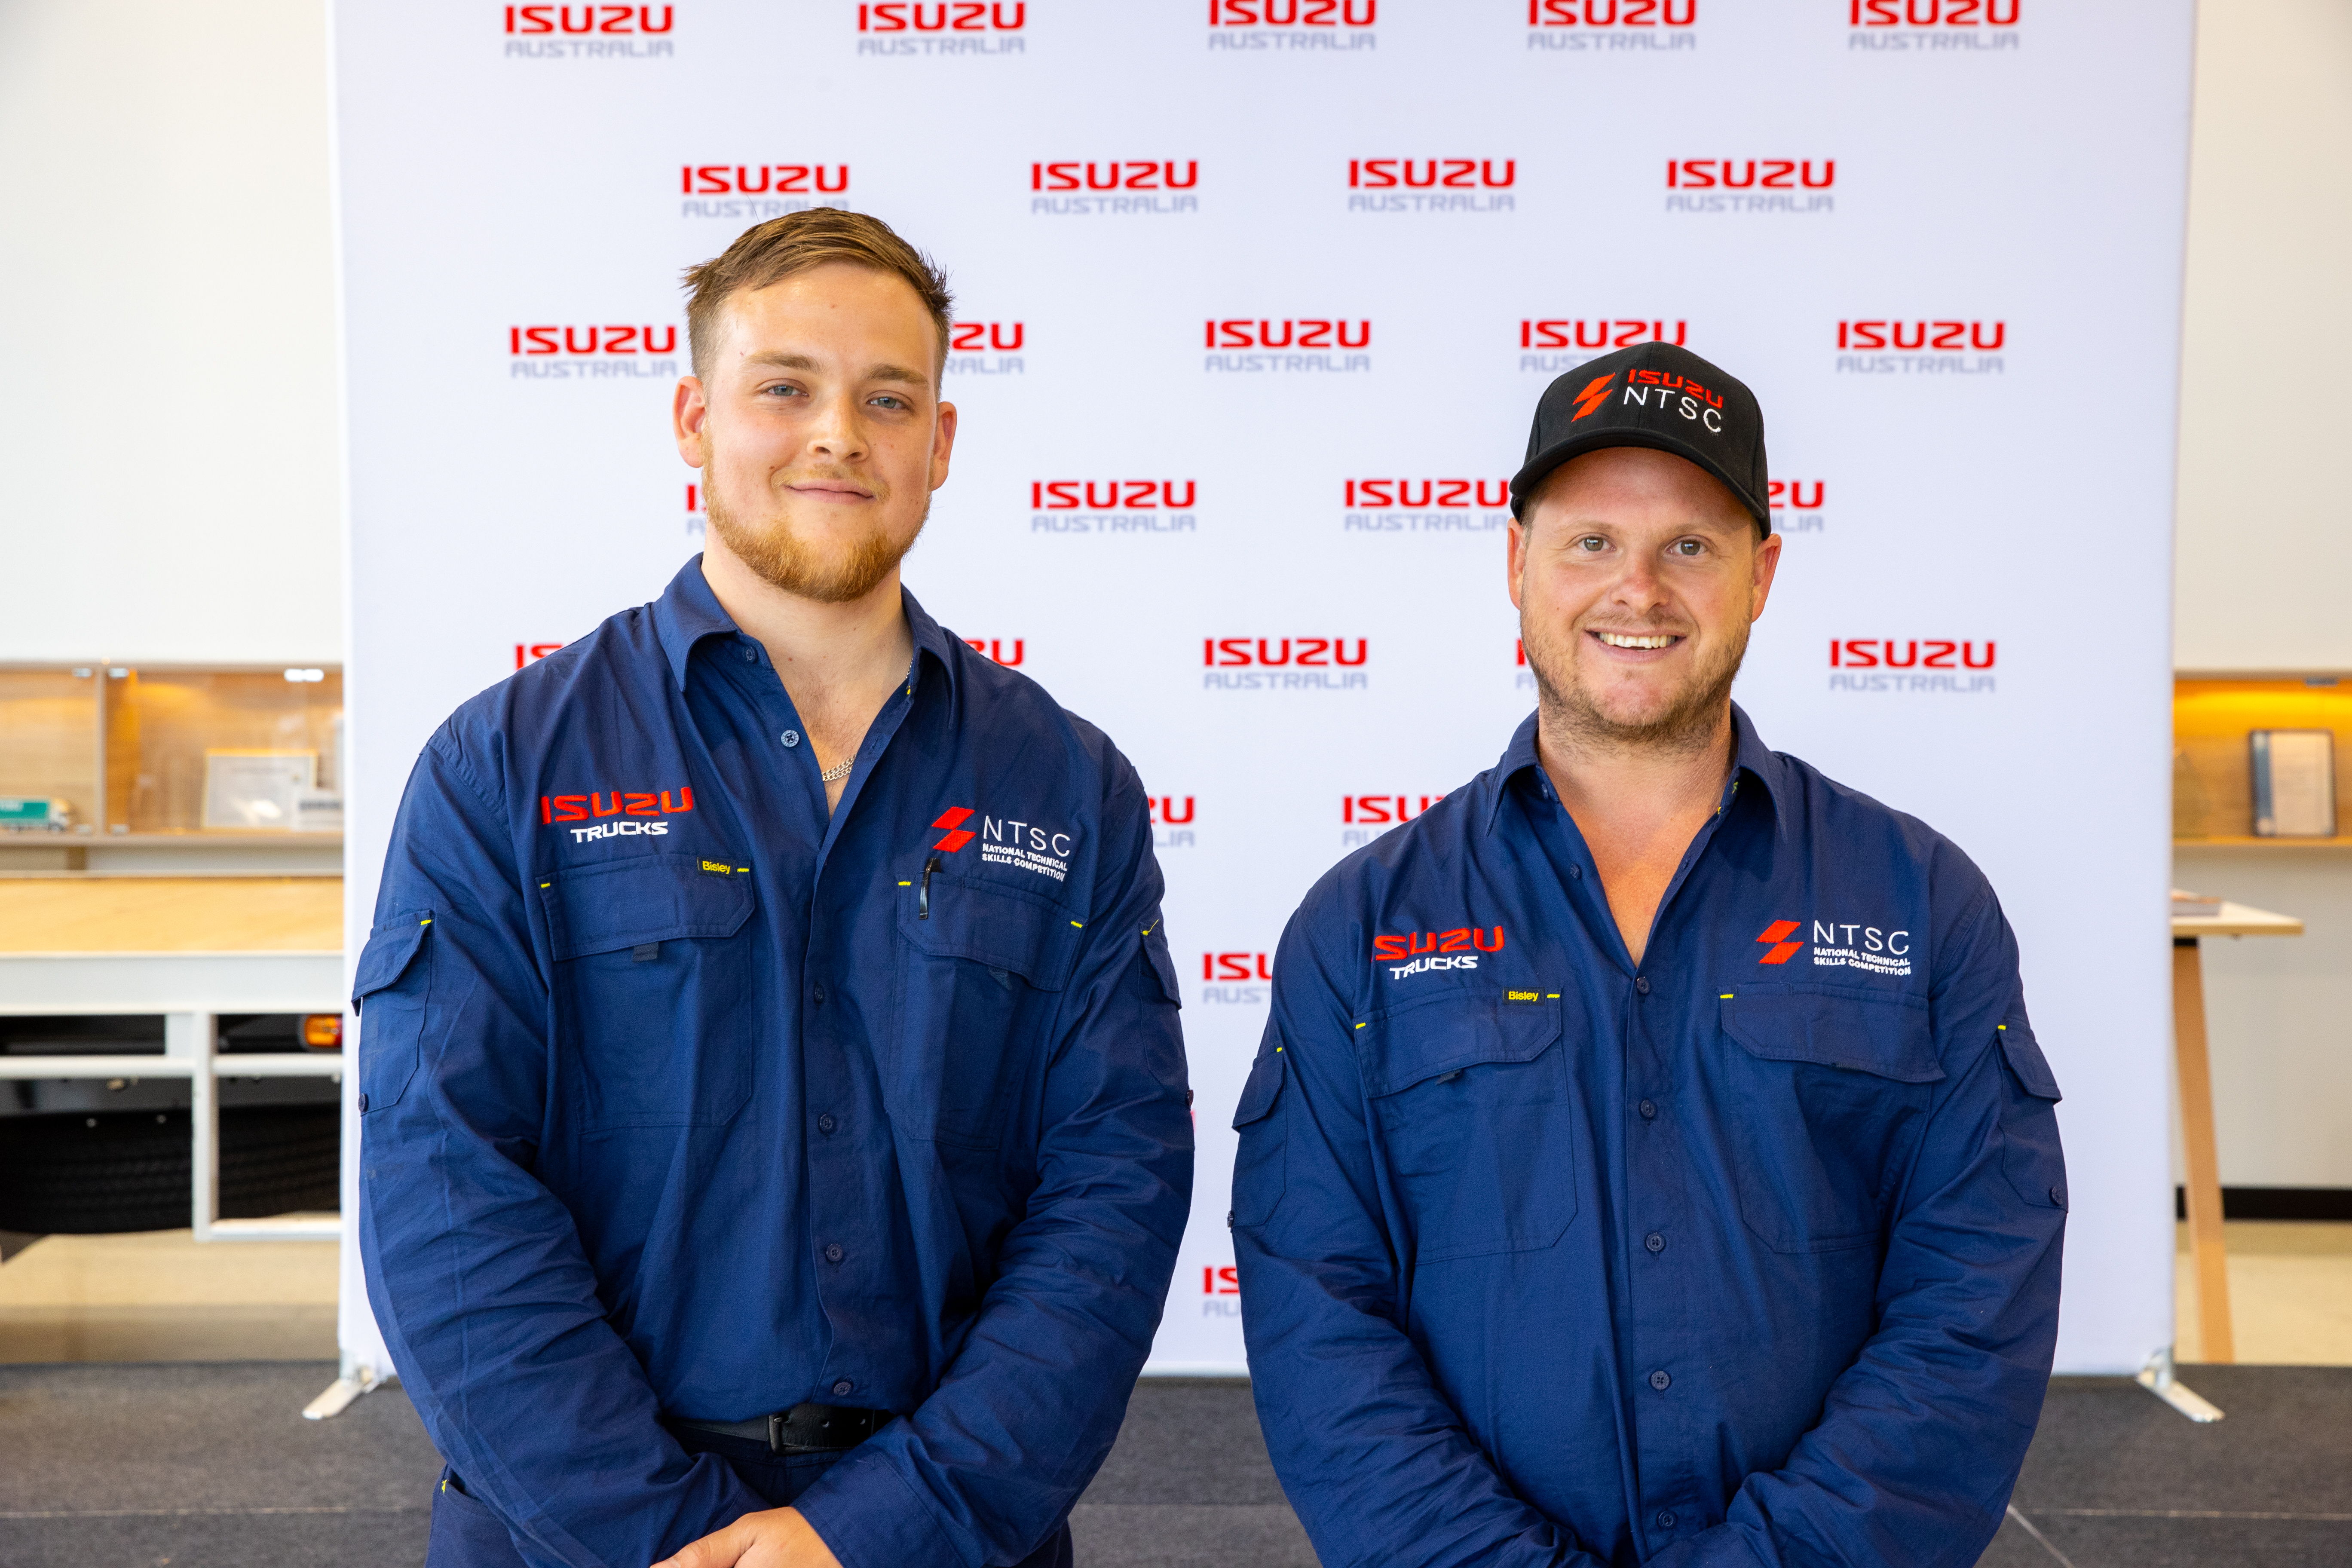 From left to right: Connor Gillam from Major Motors WA and Jason Lee from Road Runner Mechanical Services WA